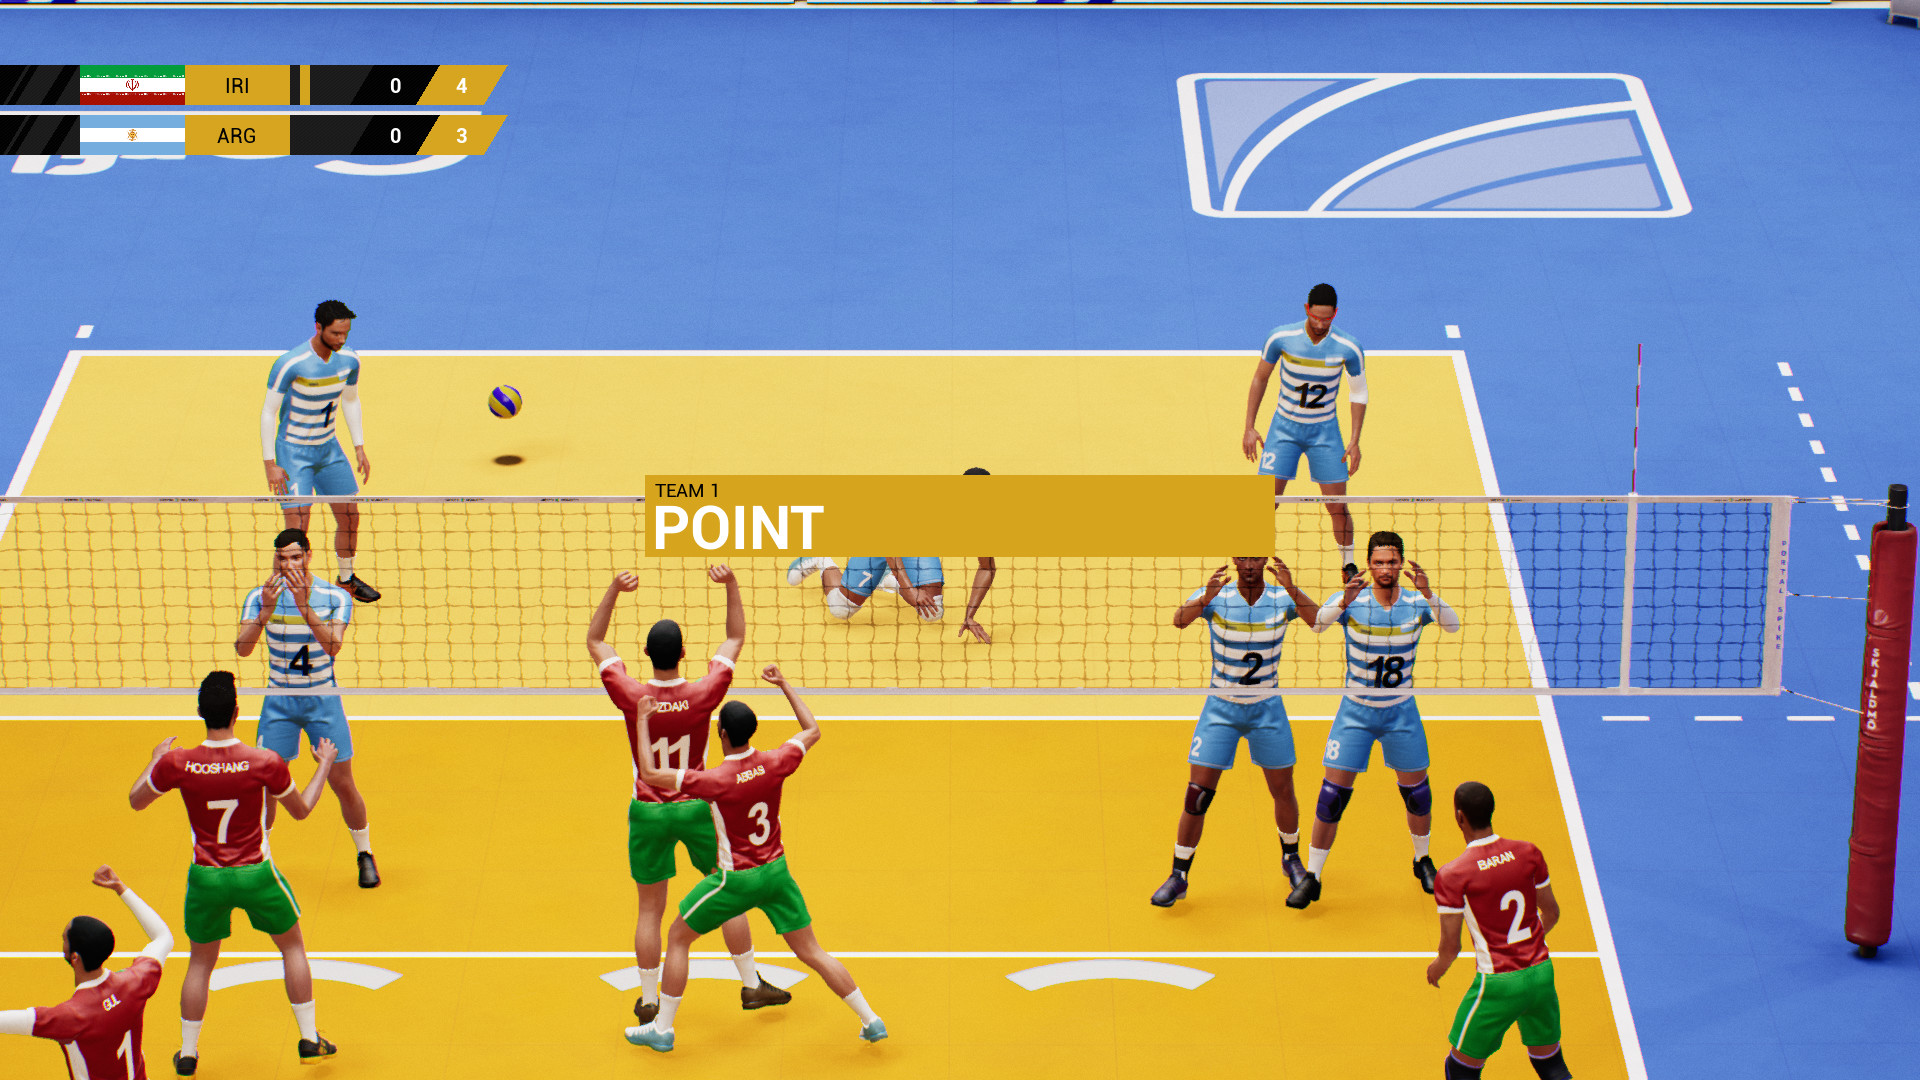 spike volleyball ps4